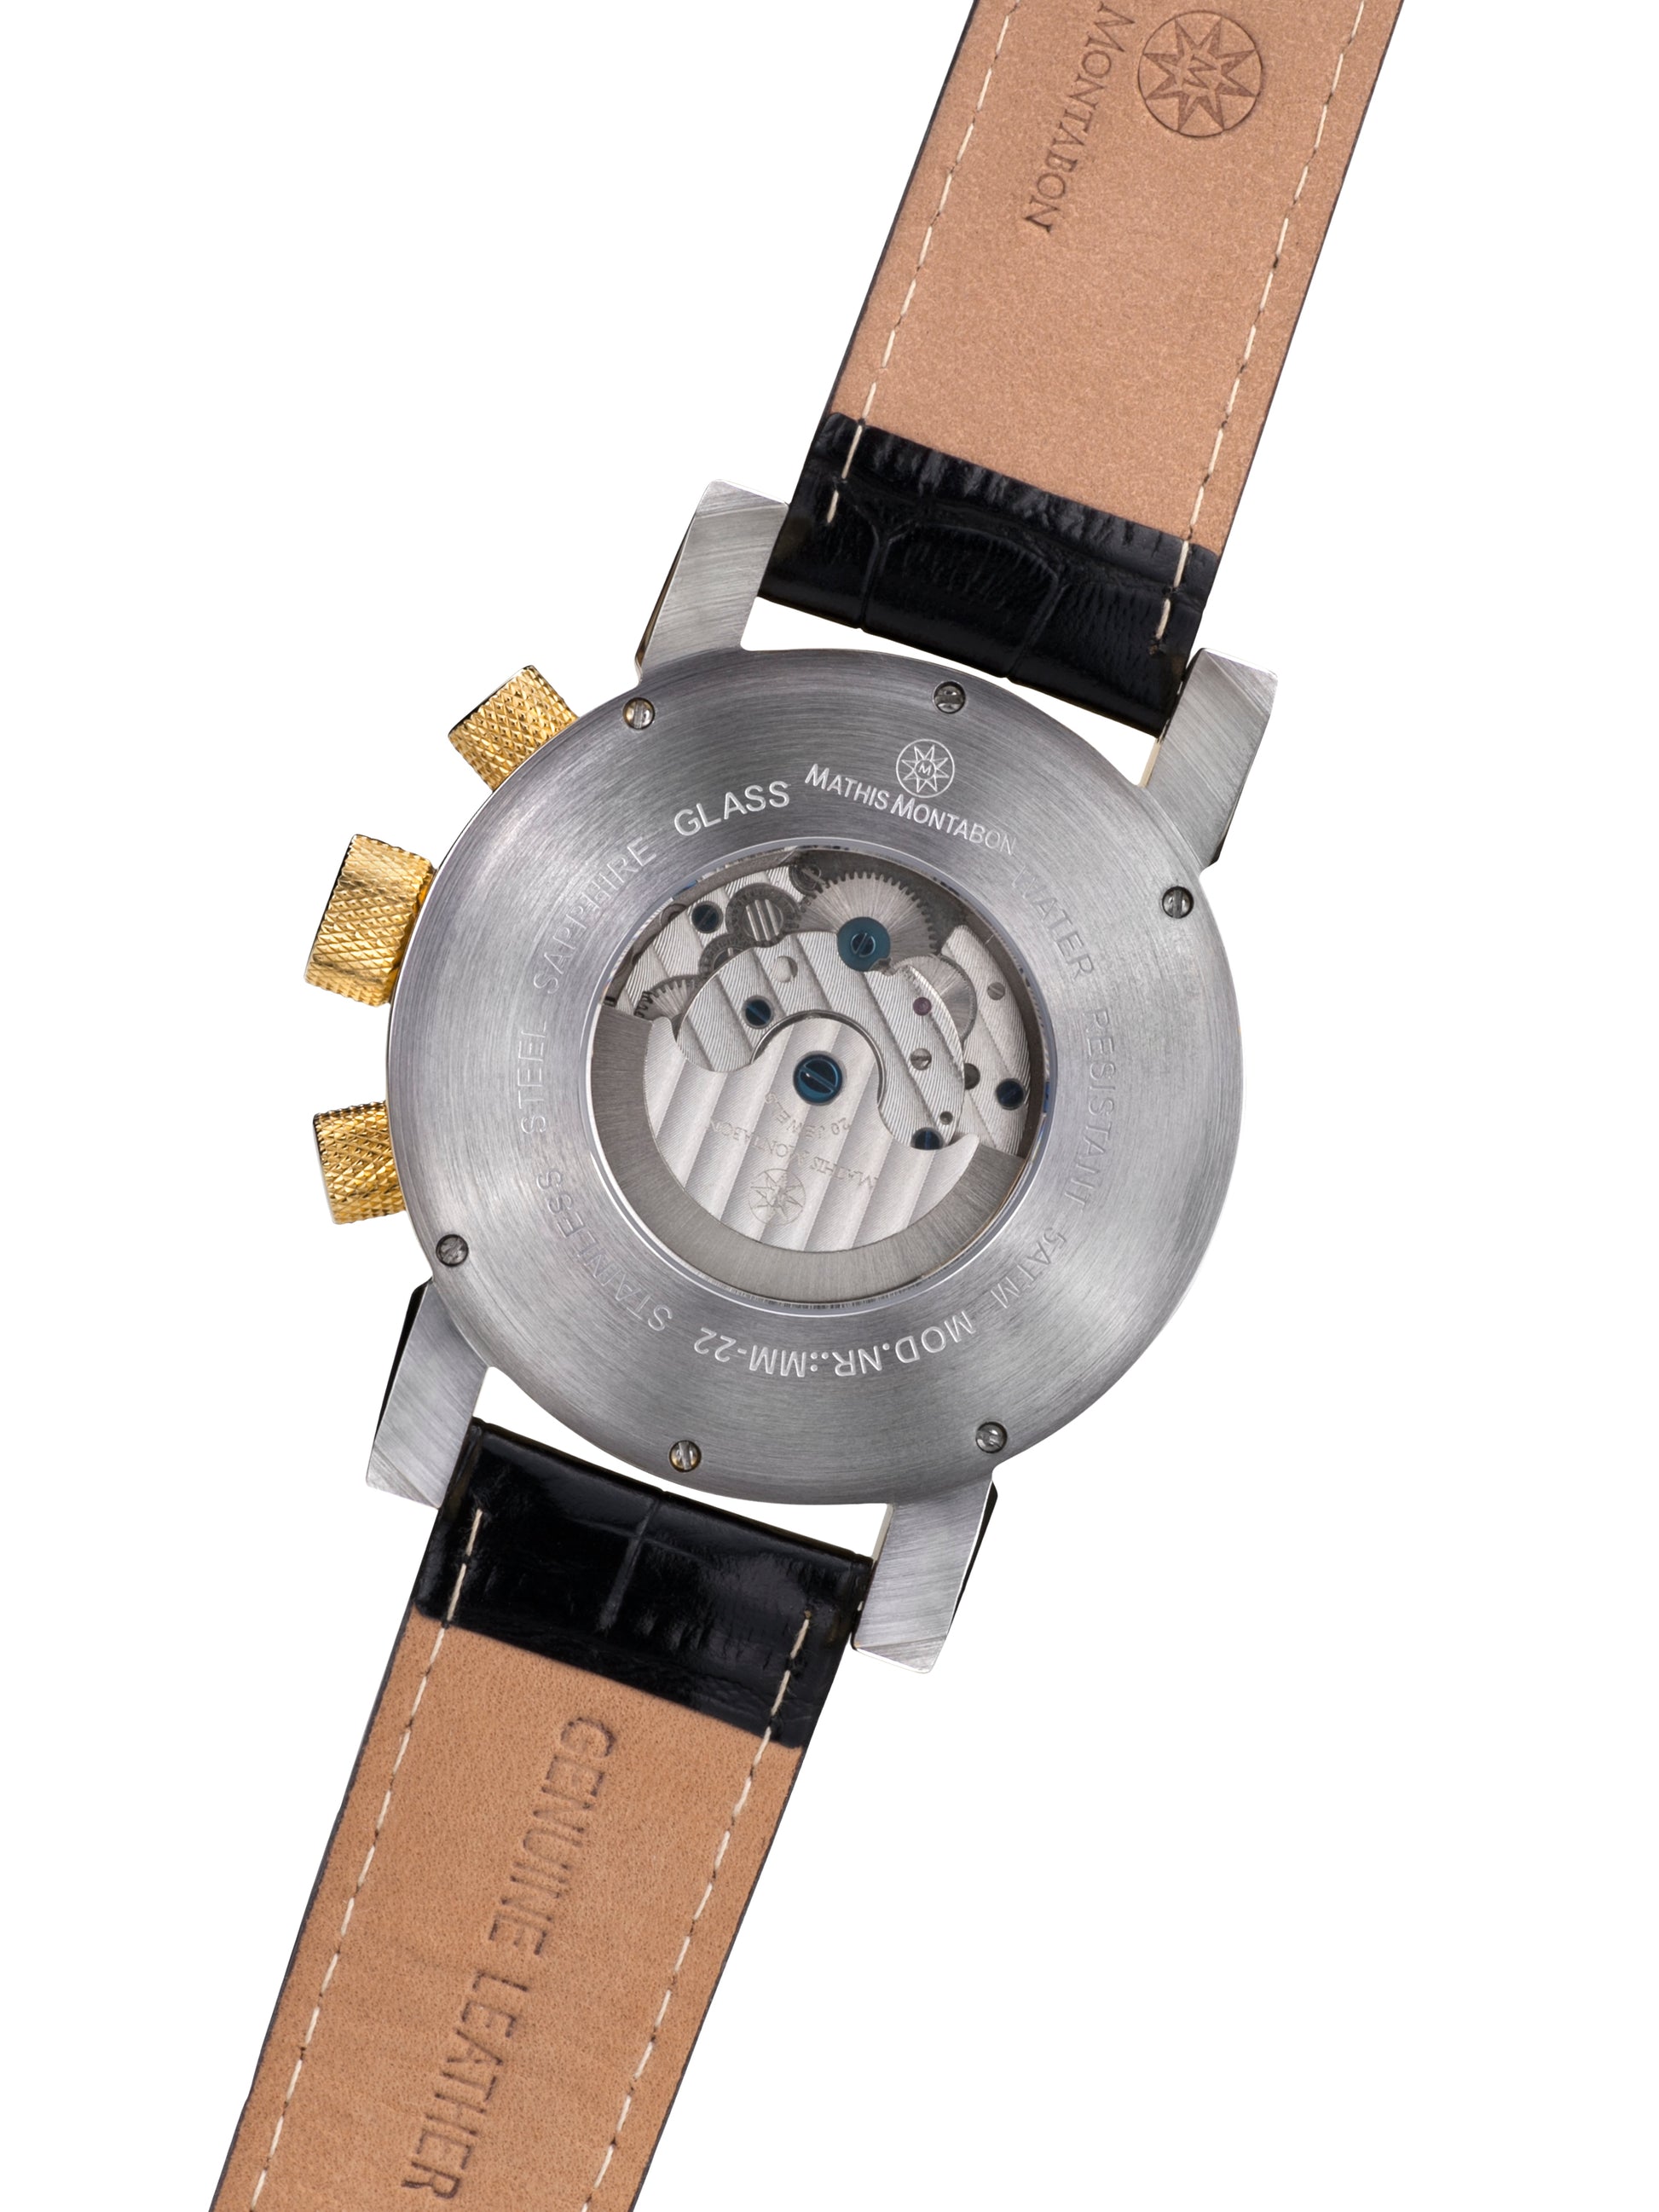 Automatic watches — La Grande — Mathis Montabon — gold silber